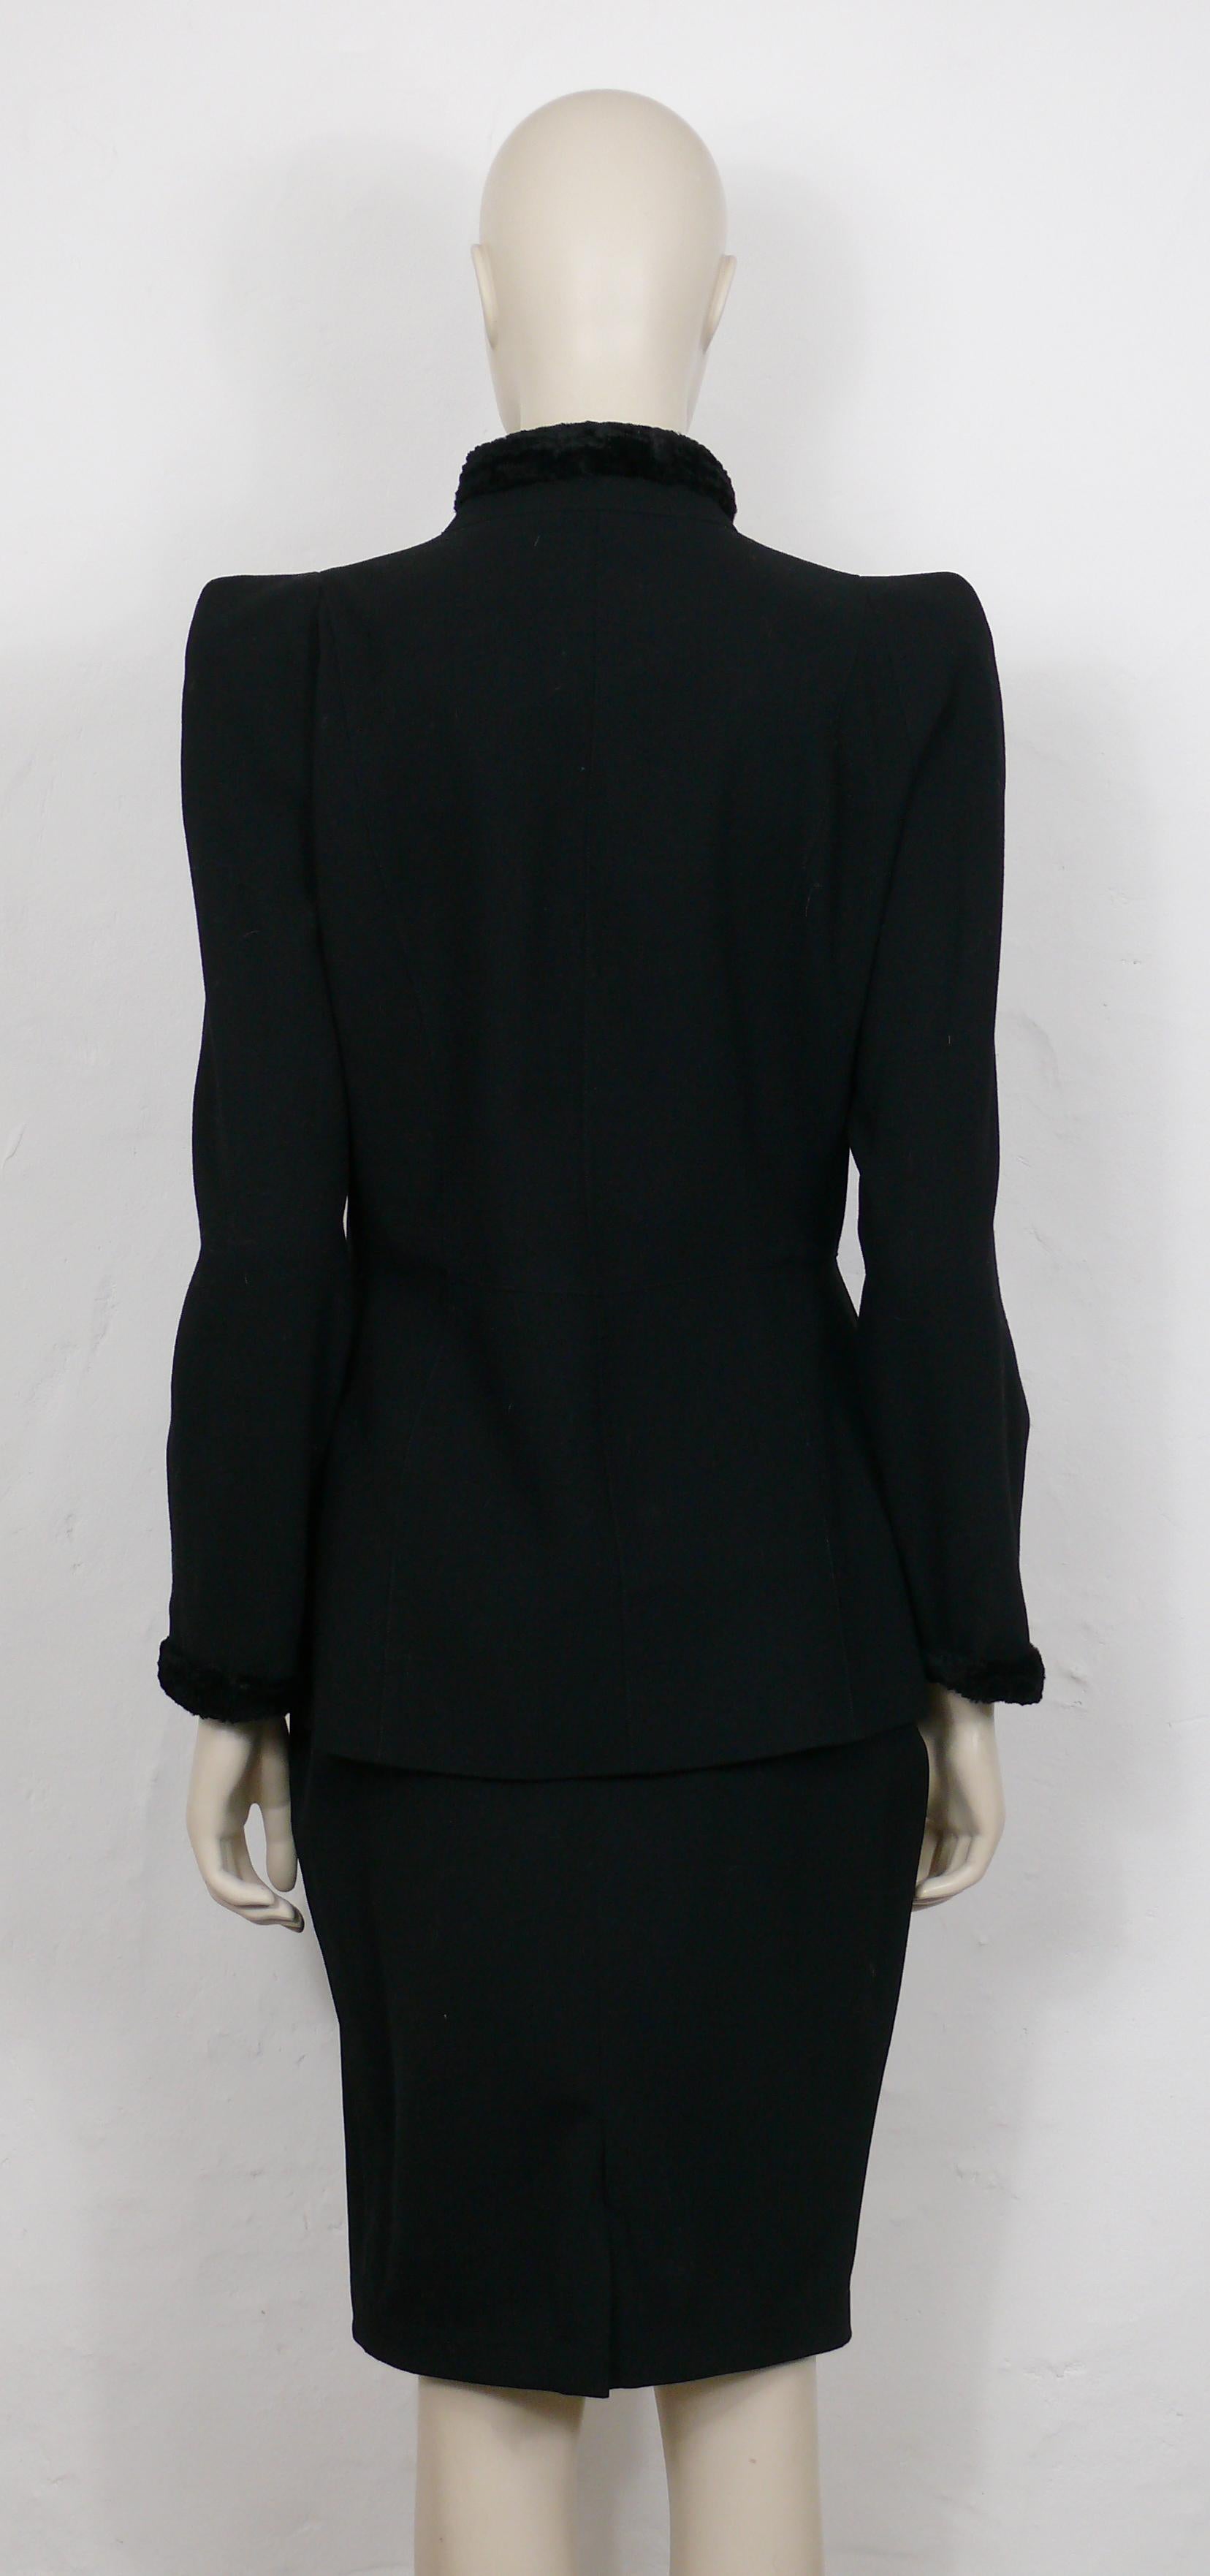 Thierry Mugler Vintage Black Wool & Claw Ornaments Skirt Suit For Sale 6